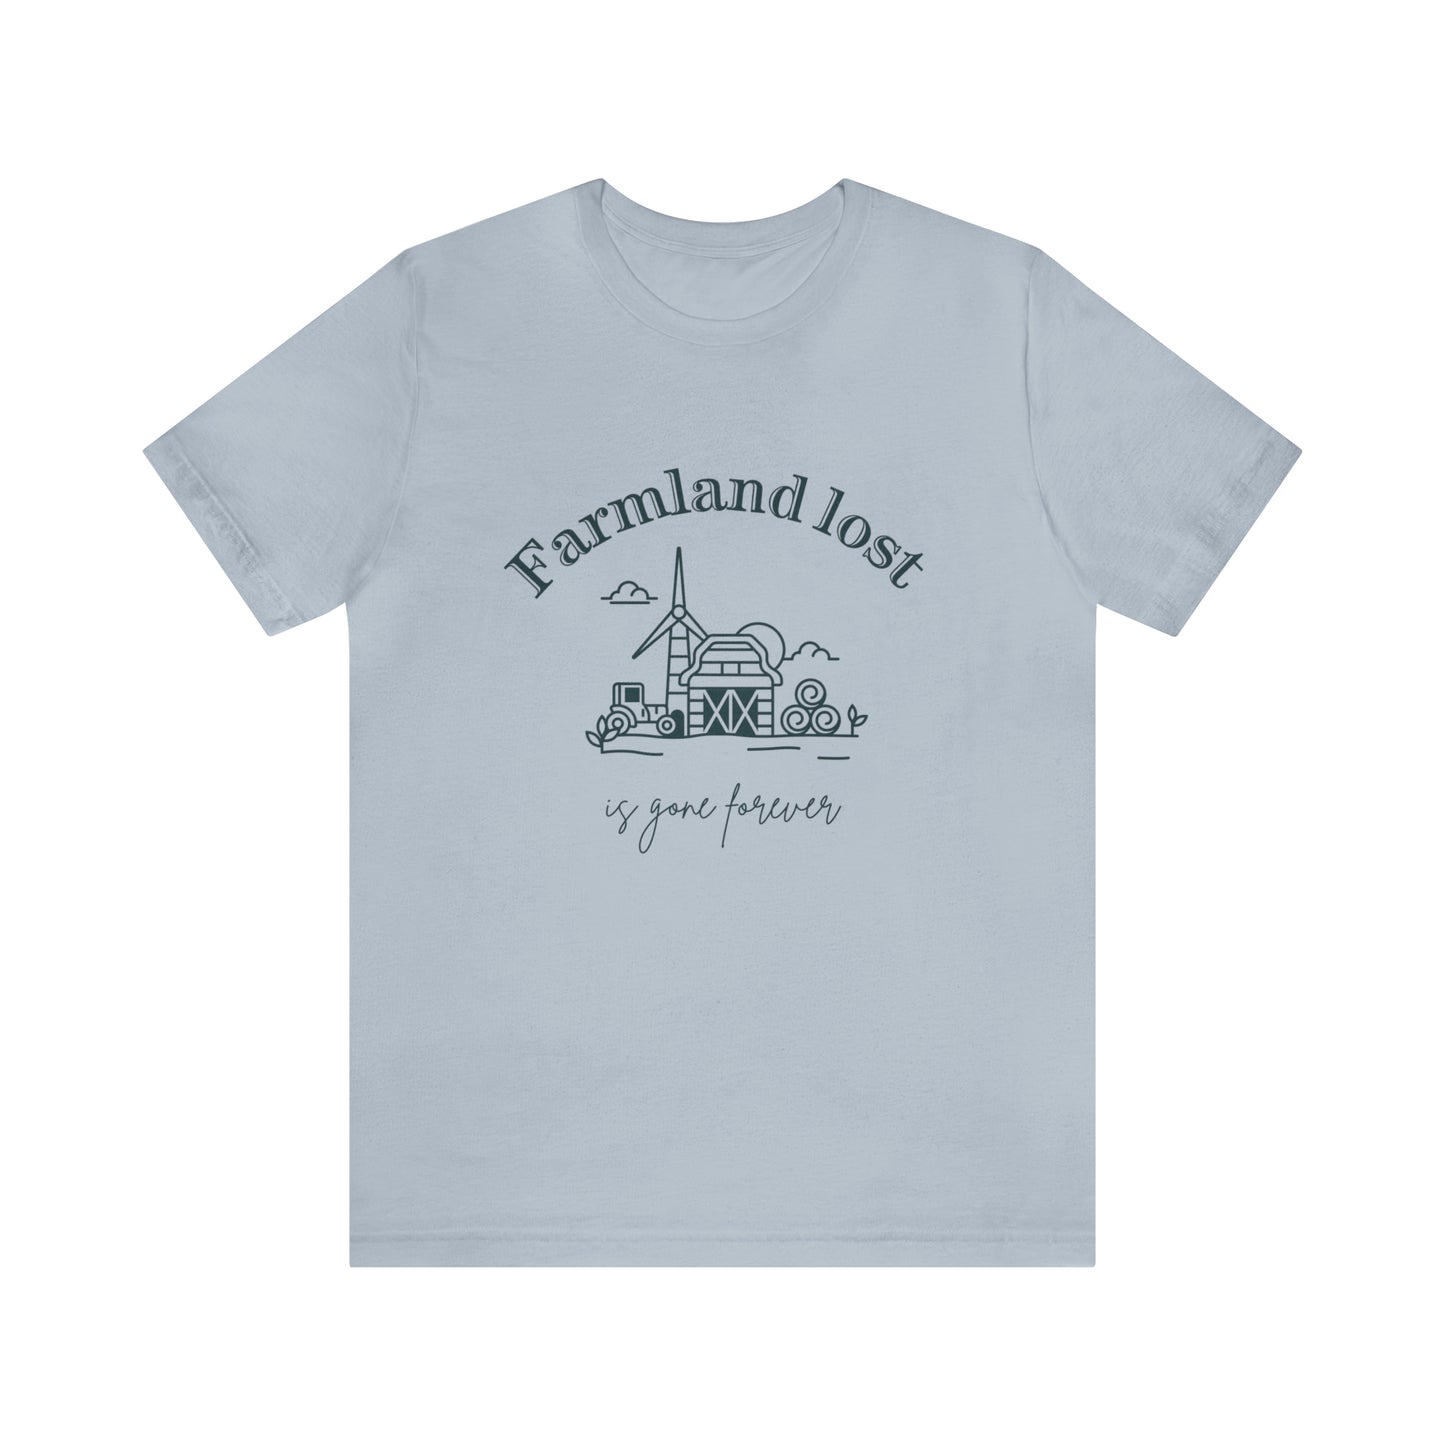 Farmland lost is gone forever no megasite Short Sleeve Unisex Adult Tee